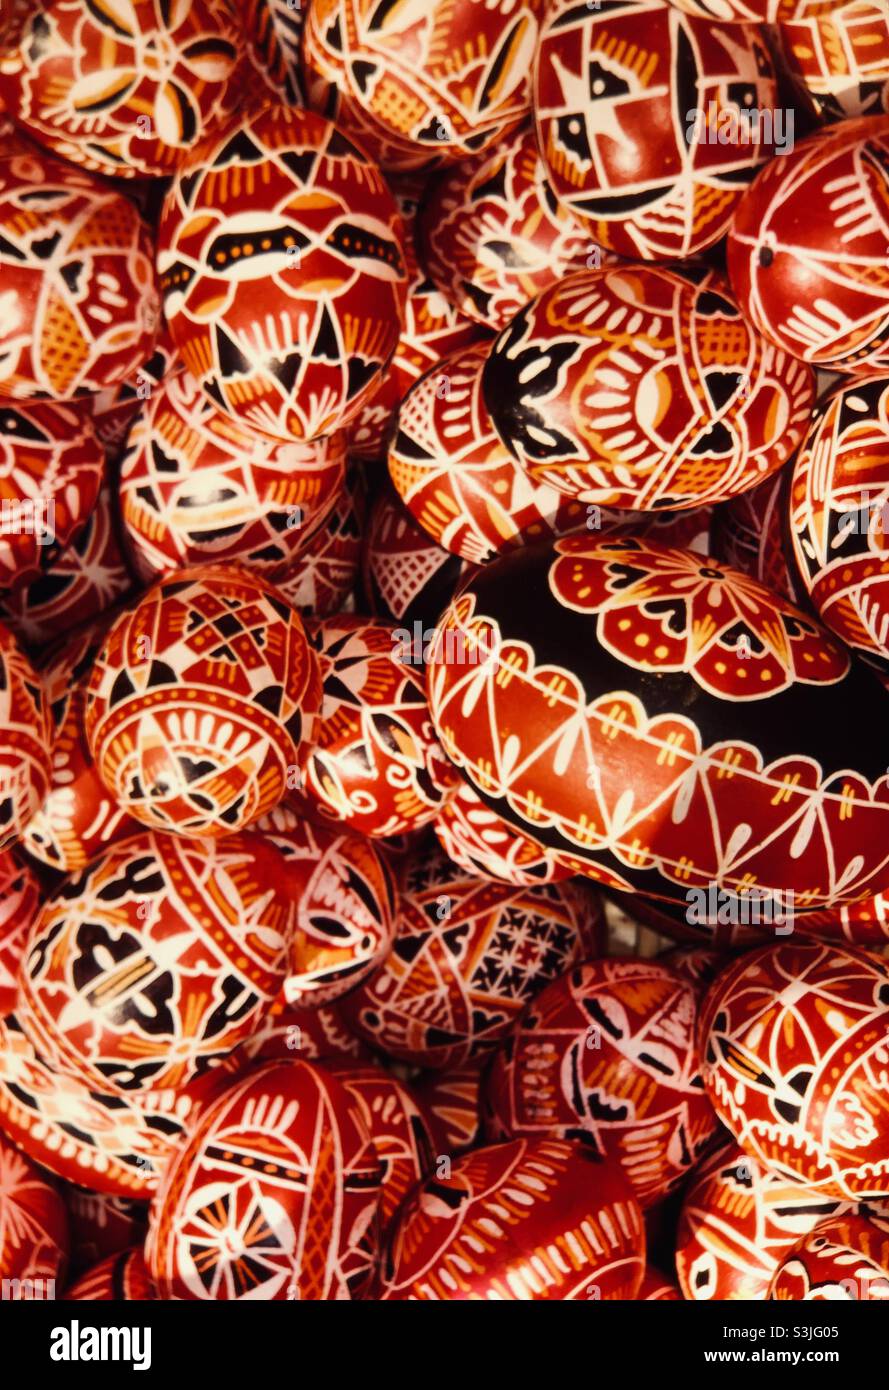 Pysanka Ukrainian Easter Eggs made with wax resist techniques Stock Photo